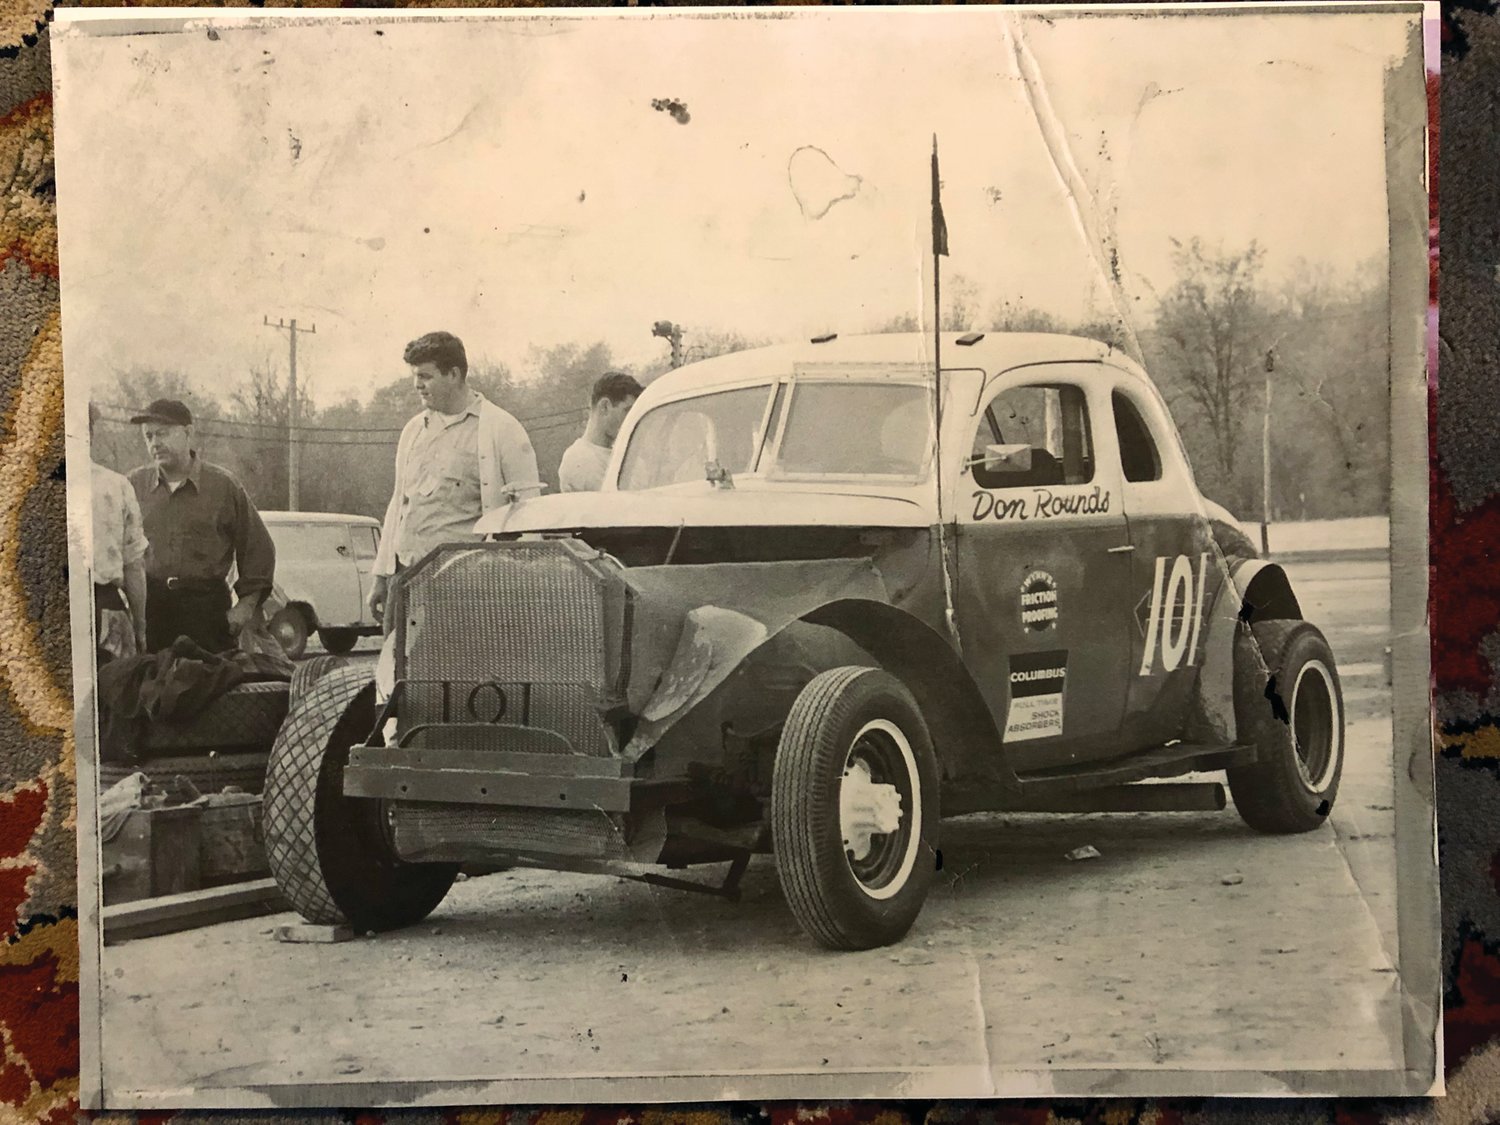 “Big Wayne” Voelker, beside the 101, provided ground support at the races. “He carried the jack, changed all the tires around, and warmed it up,” recalls Billy Rounds.